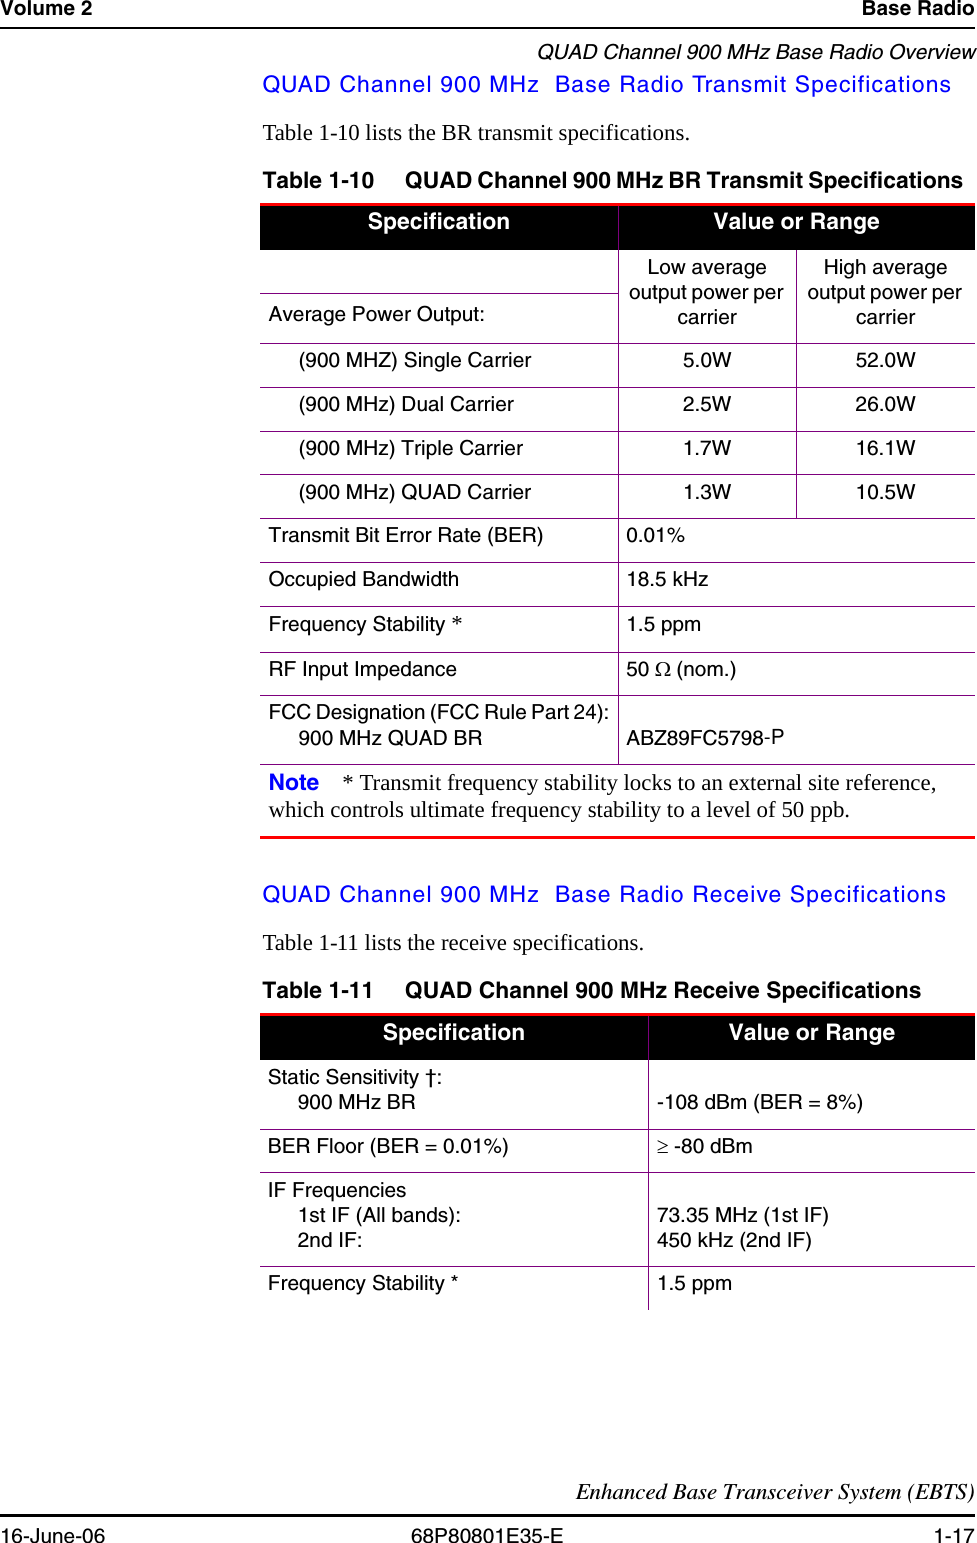 Volume 2 Base RadioQUAD Channel 900 MHz Base Radio OverviewEnhanced Base Transceiver System (EBTS)16-June-06 68P80801E35-E 1-17QUAD Channel 900 MHz  Base Radio Transmit SpecificationsTable 1-10 lists the BR transmit specifications.QUAD Channel 900 MHz  Base Radio Receive SpecificationsTable 1-11 lists the receive specifications.     Table 1-10 QUAD Channel 900 MHz BR Transmit Specifications Specification Value or RangeLow average output power per carrierHigh average output power per carrierAverage Power Output:(900 MHZ) Single Carrier 5.0W 52.0W(900 MHz) Dual Carrier 2.5W 26.0W(900 MHz) Triple Carrier 1.7W 16.1W(900 MHz) QUAD Carrier 1.3W 10.5WTransmit Bit Error Rate (BER) 0.01%Occupied Bandwidth 18.5 kHzFrequency Stability * 1.5 ppmRF Input Impedance 50 Ω (nom.)FCC Designation (FCC Rule Part 24):900 MHz QUAD BR ABZ89FC5798-PNote * Transmit frequency stability locks to an external site reference, which controls ultimate frequency stability to a level of 50 ppb.Table 1-11 QUAD Channel 900 MHz Receive SpecificationsSpecification Value or RangeStatic Sensitivity †:900 MHz BR  -108 dBm (BER = 8%)BER Floor (BER = 0.01%) ≥ -80 dBmIF Frequencies1st IF (All bands):2nd IF:73.35 MHz (1st IF)450 kHz (2nd IF)Frequency Stability * 1.5 ppm